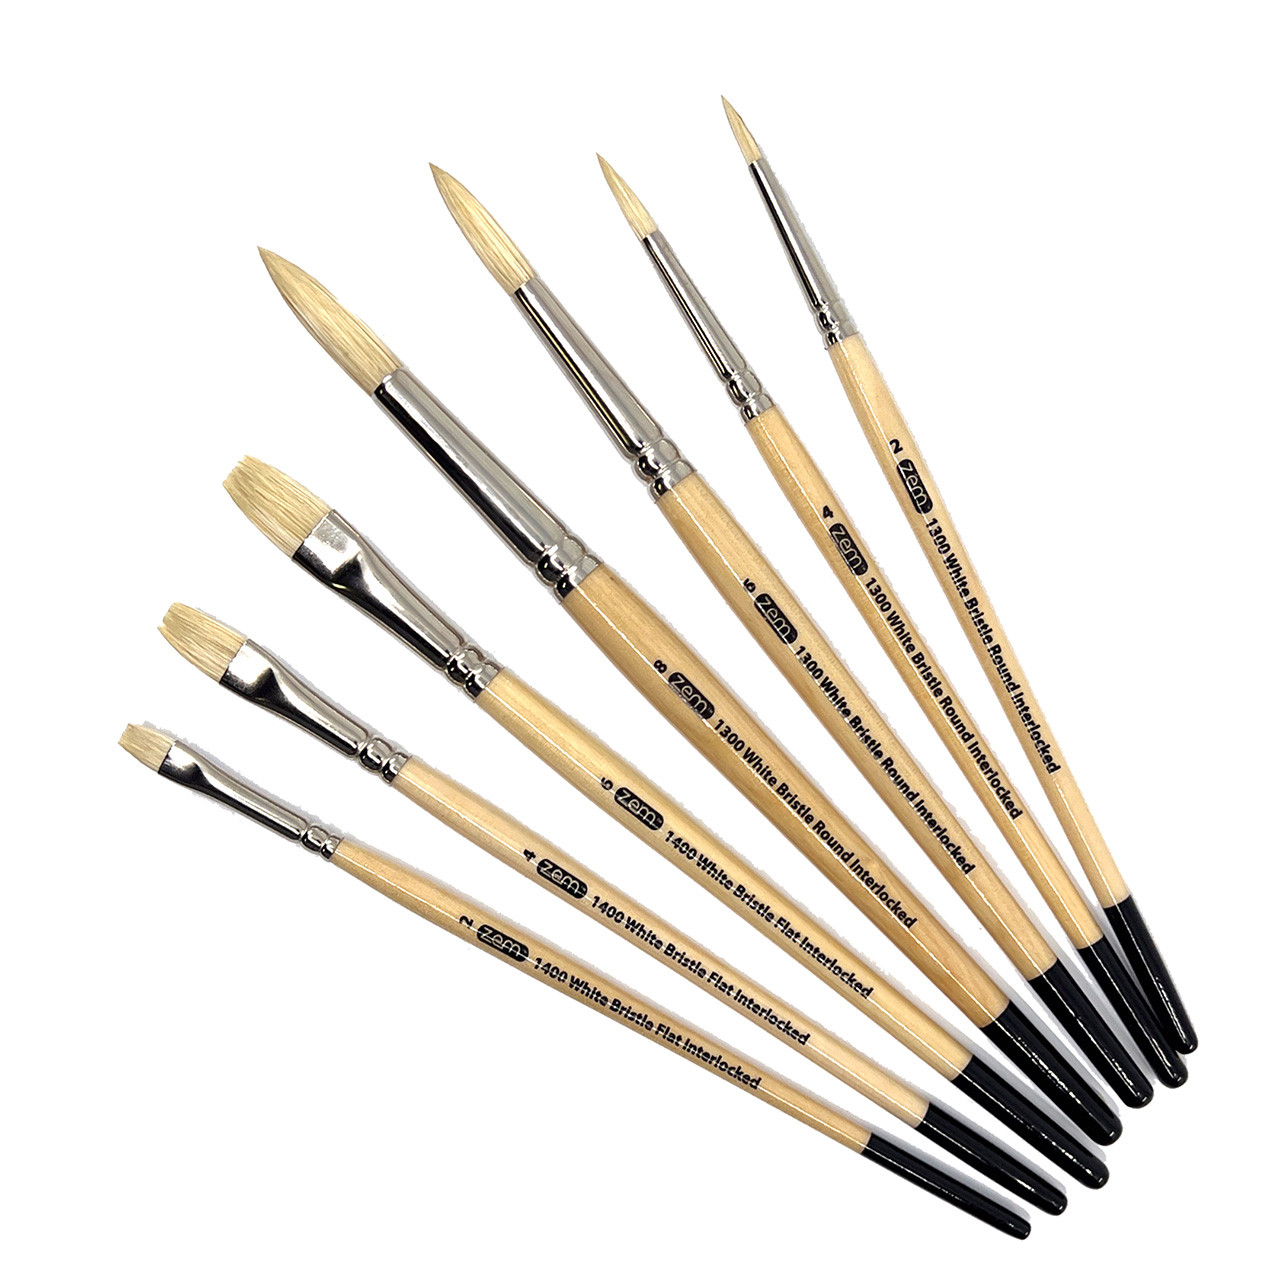 Sax White Bristle Paint Brushes with Short Wooden Handles, Flat and Round  Assorted Sizes, Set of 24